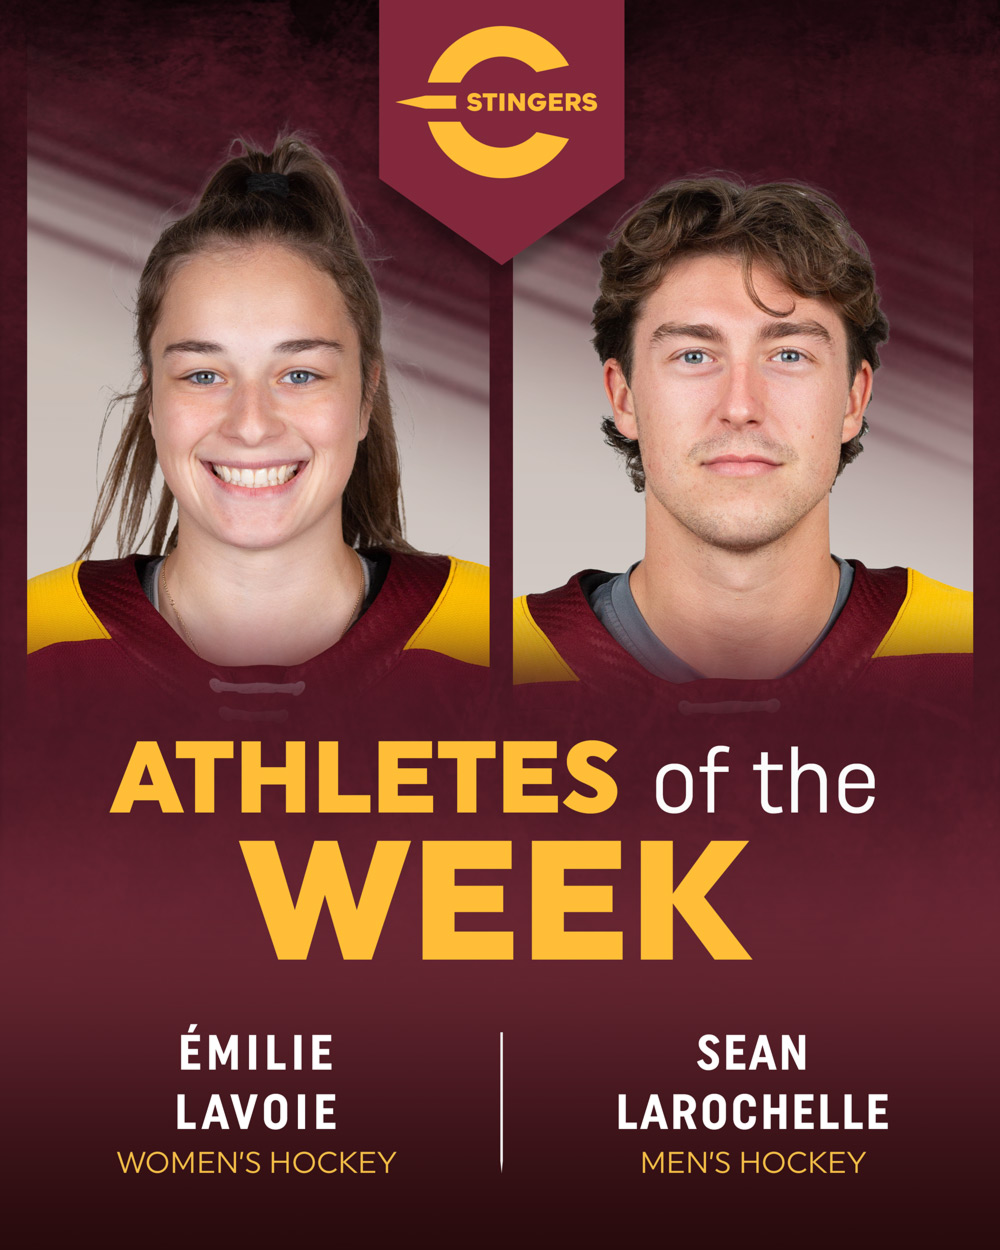 Athletes of the Week: Émilie Lavoie and Sean Larochelle